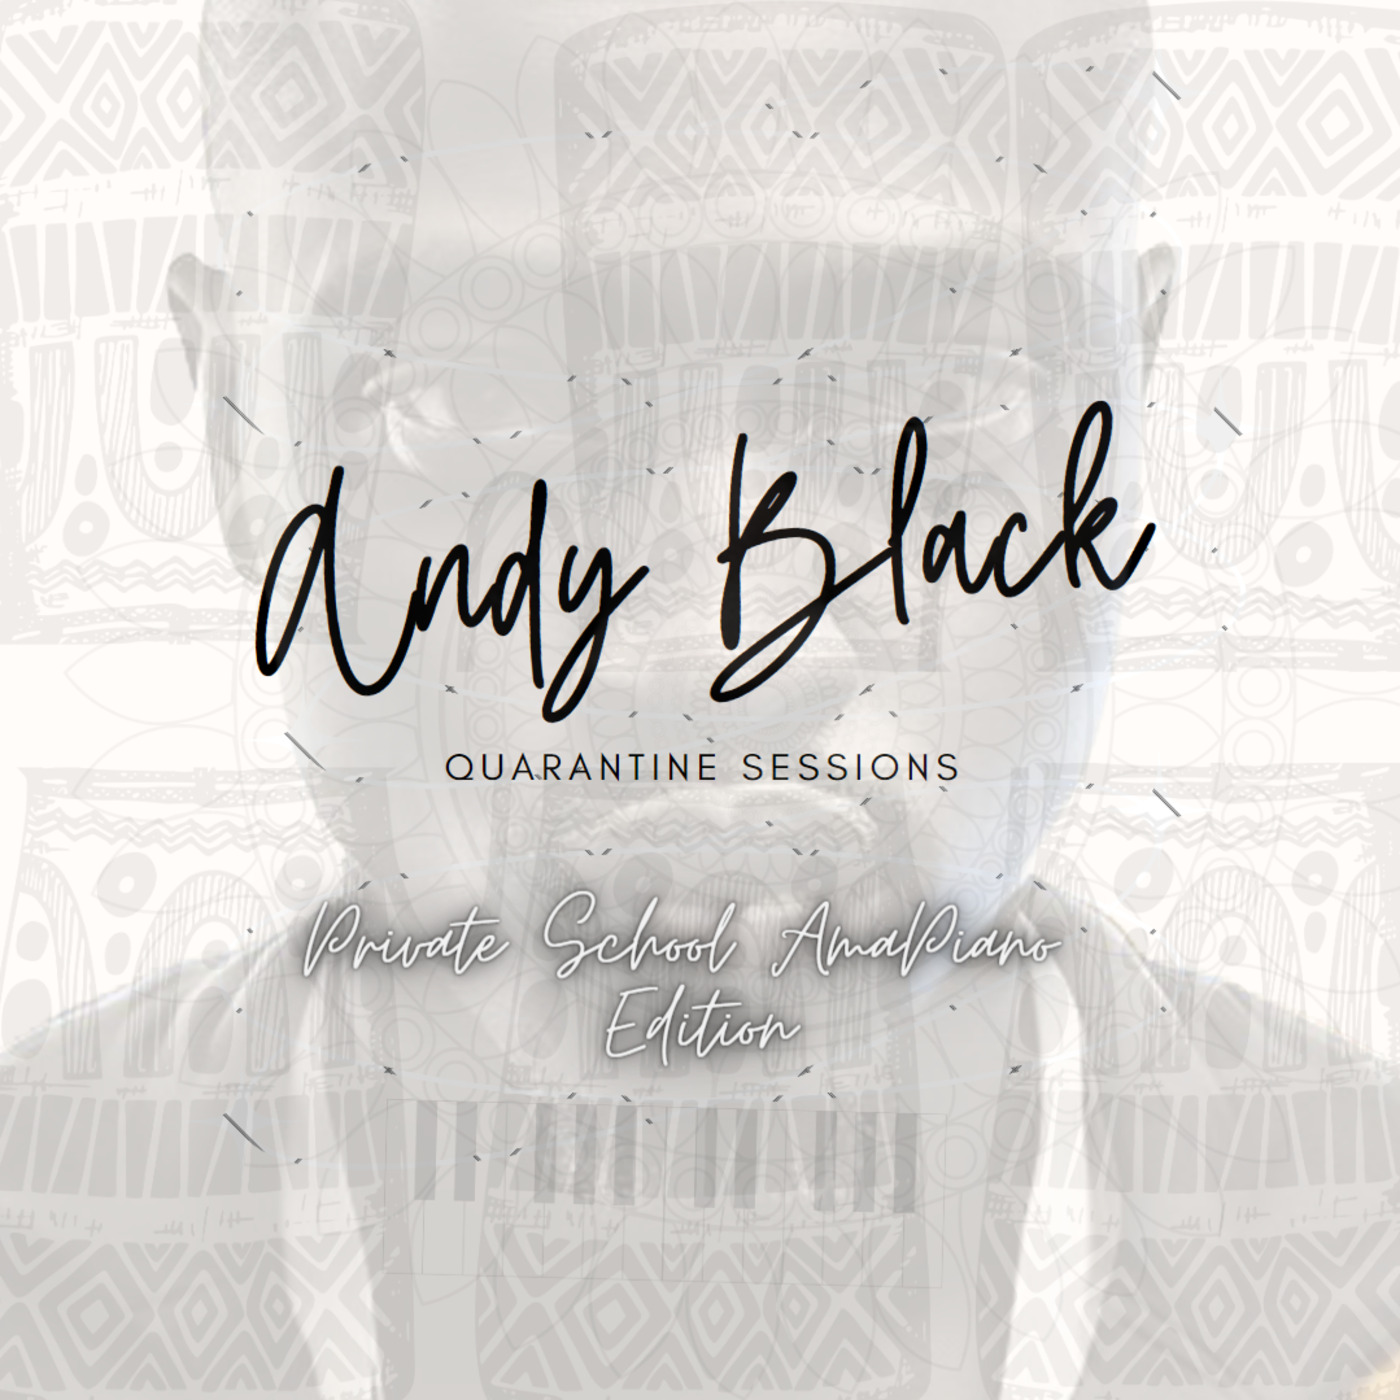 Andy Black - #QuarantineSessions - Afro House  (Private School Amapiano Edition) Episode 79